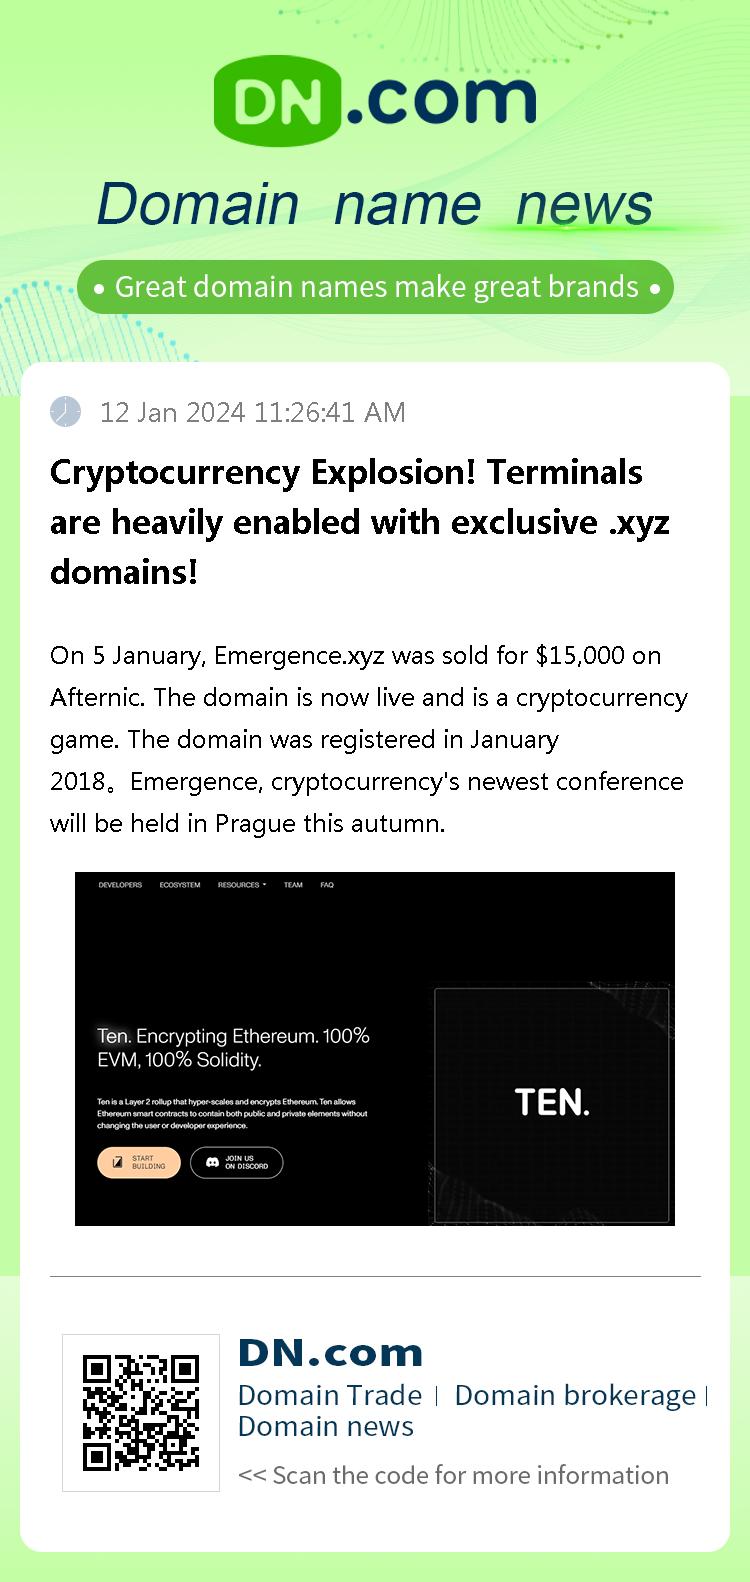 Cryptocurrency Explosion! Terminals are heavily enabled with exclusive .xyz domains!